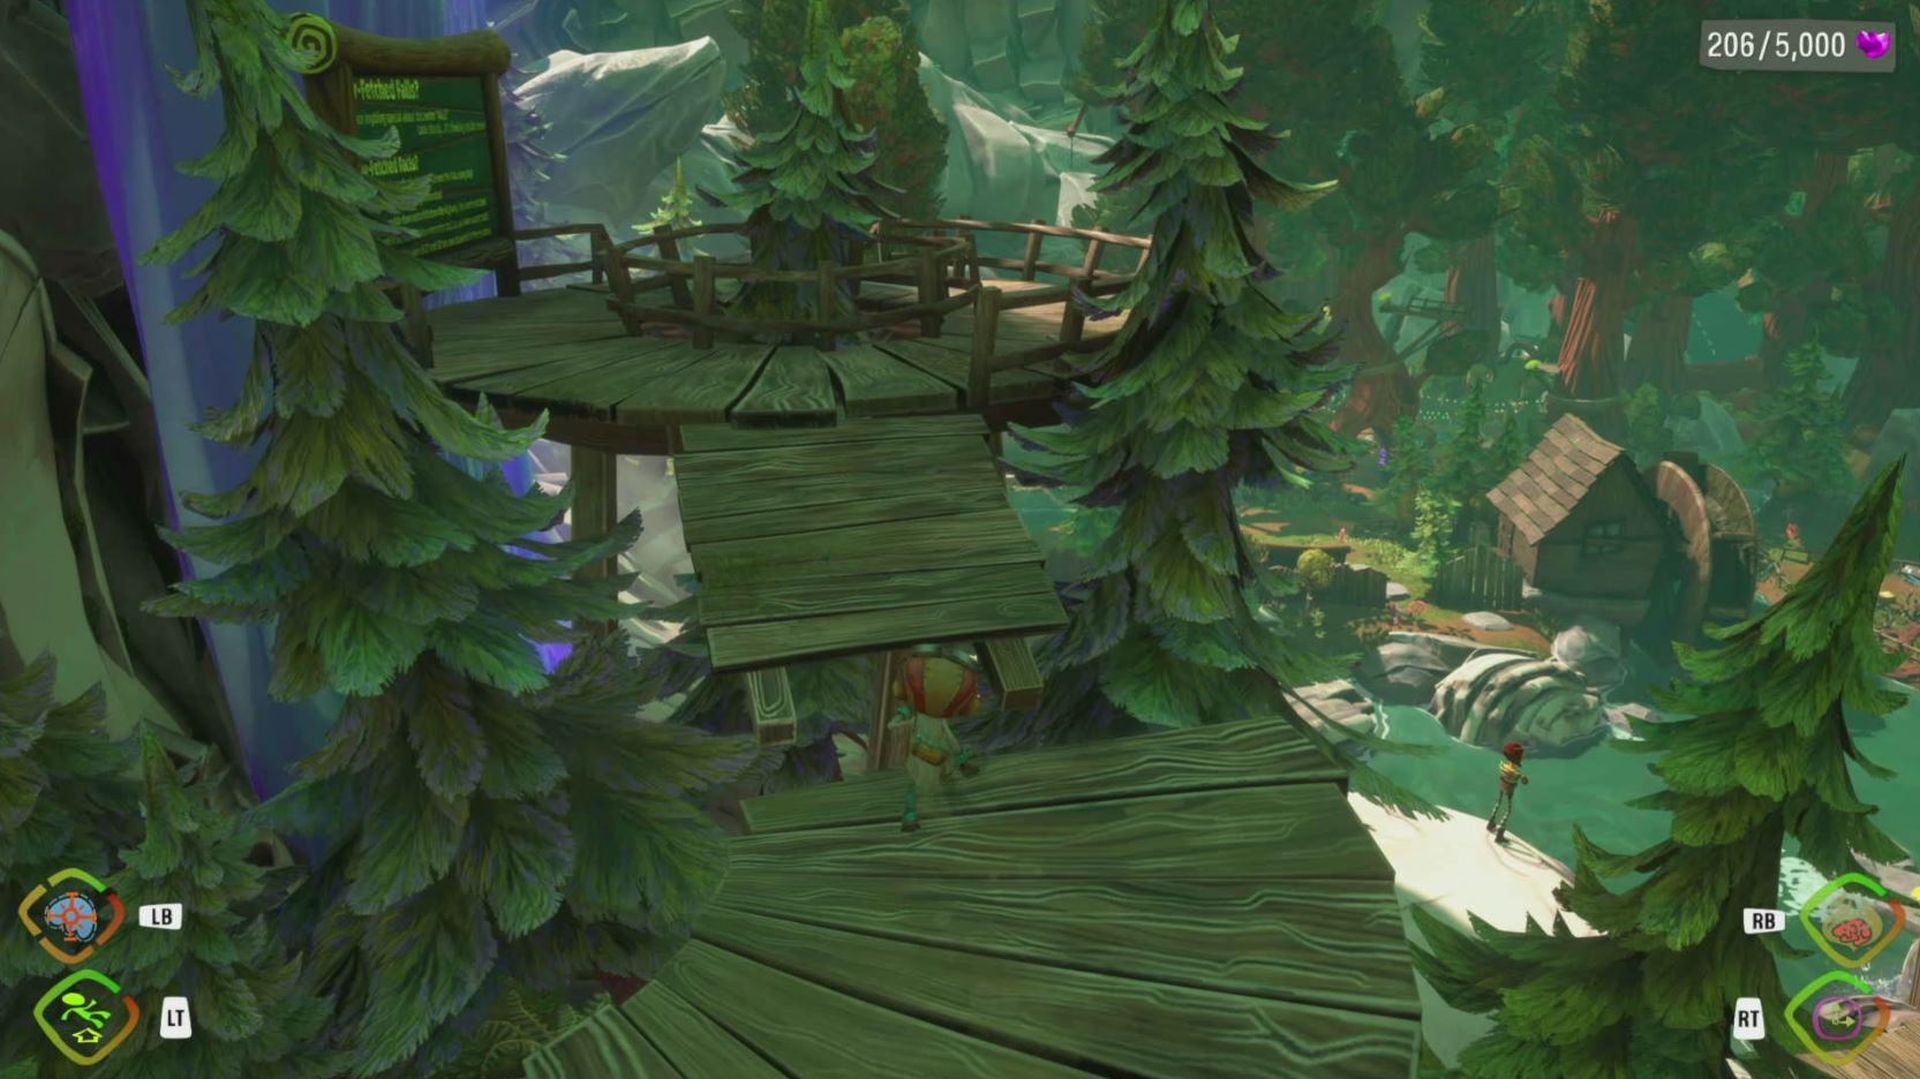 Psychonauts 2 rare fungus location: Raz can be seen platforming on a wooden platform among the trees.